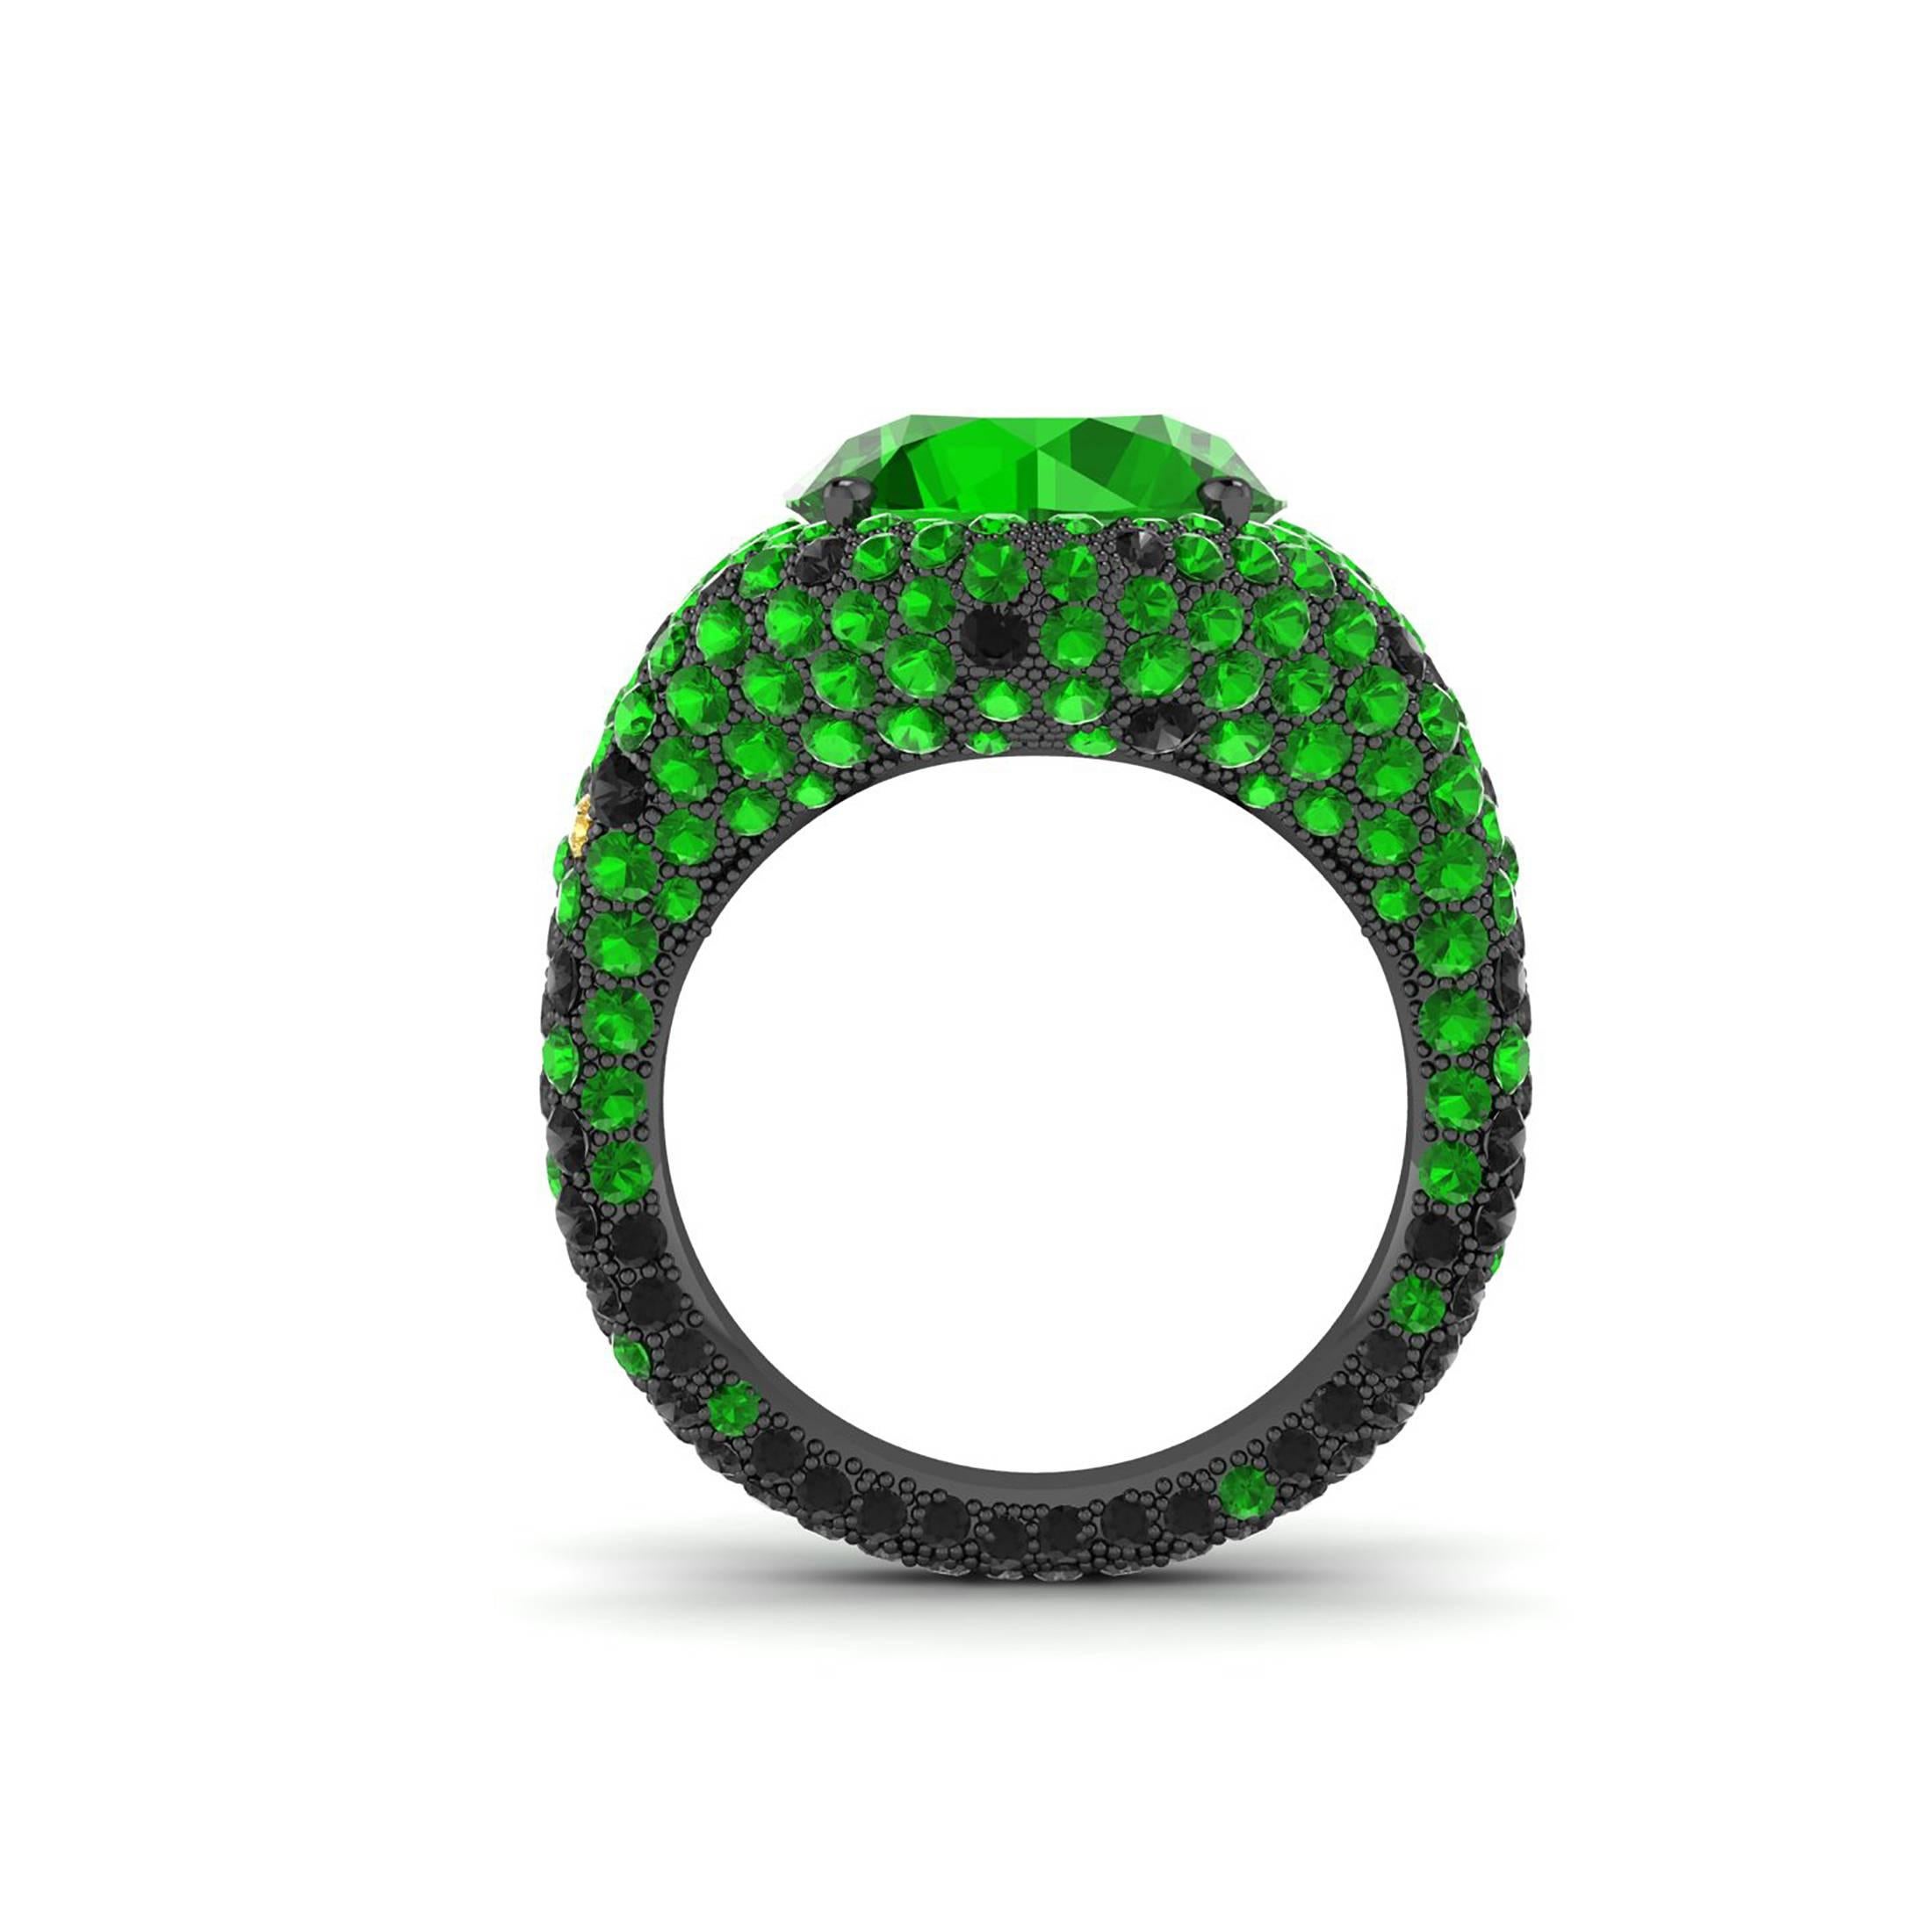 Ferrucci, a superb creation with combination of colors and light, with a touch darkness into it, circa 5.50 carats Green Tsavorite and approximately 1.00 carat of black diamonds merge into an 18k black gold cocktail organic ring, conceived and hand